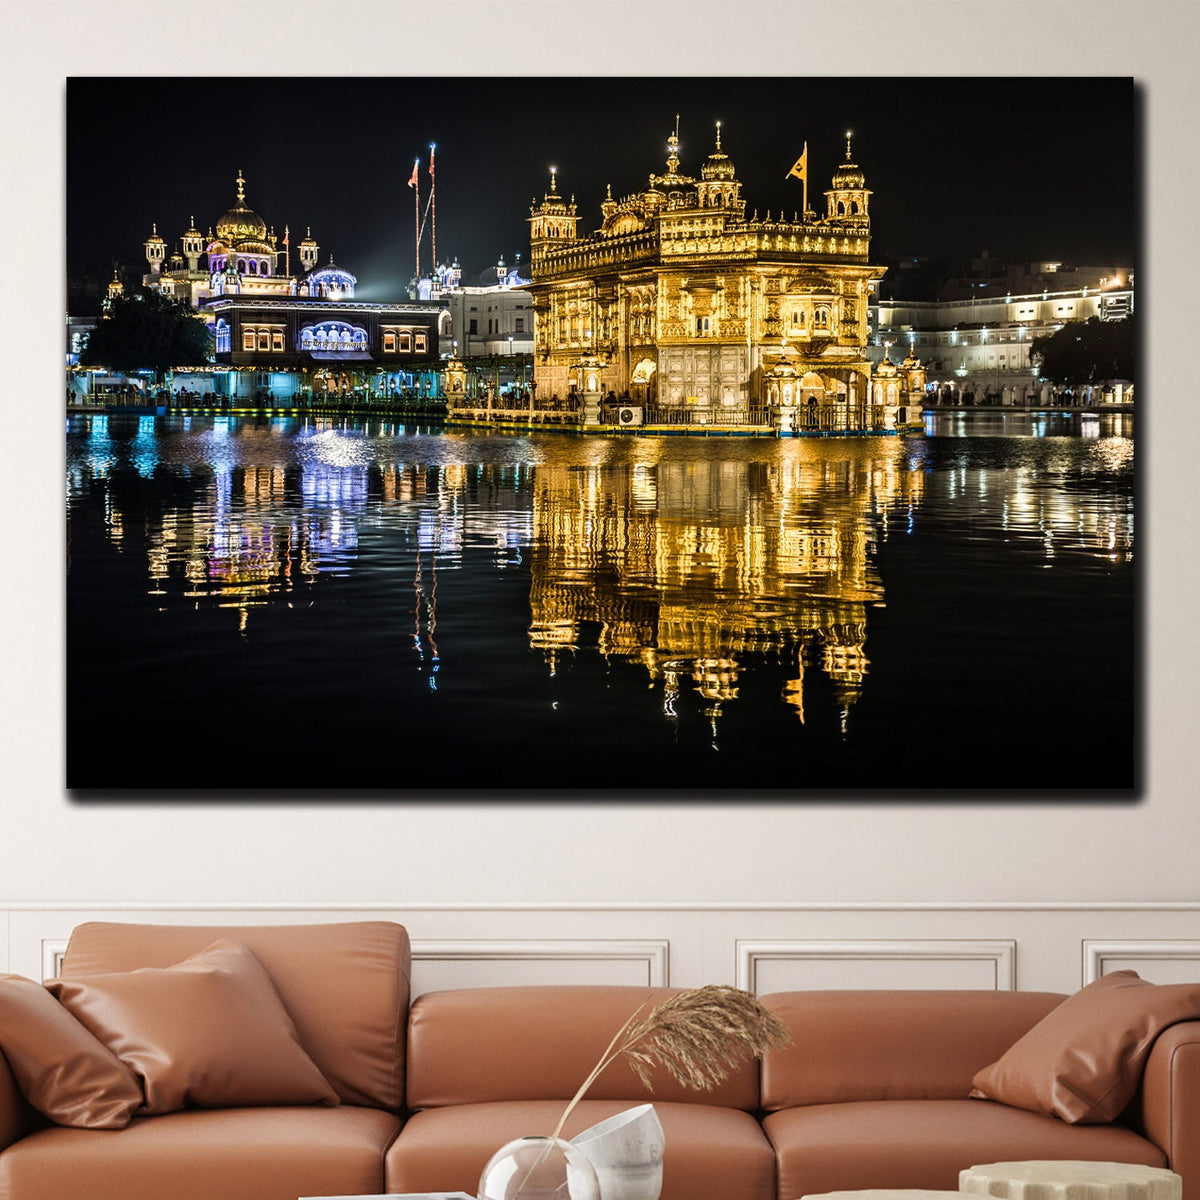 https://cdn.shopify.com/s/files/1/0387/9986/8044/products/TheMajesticGoldenTempleCanvasArtprintStretched-4.jpg